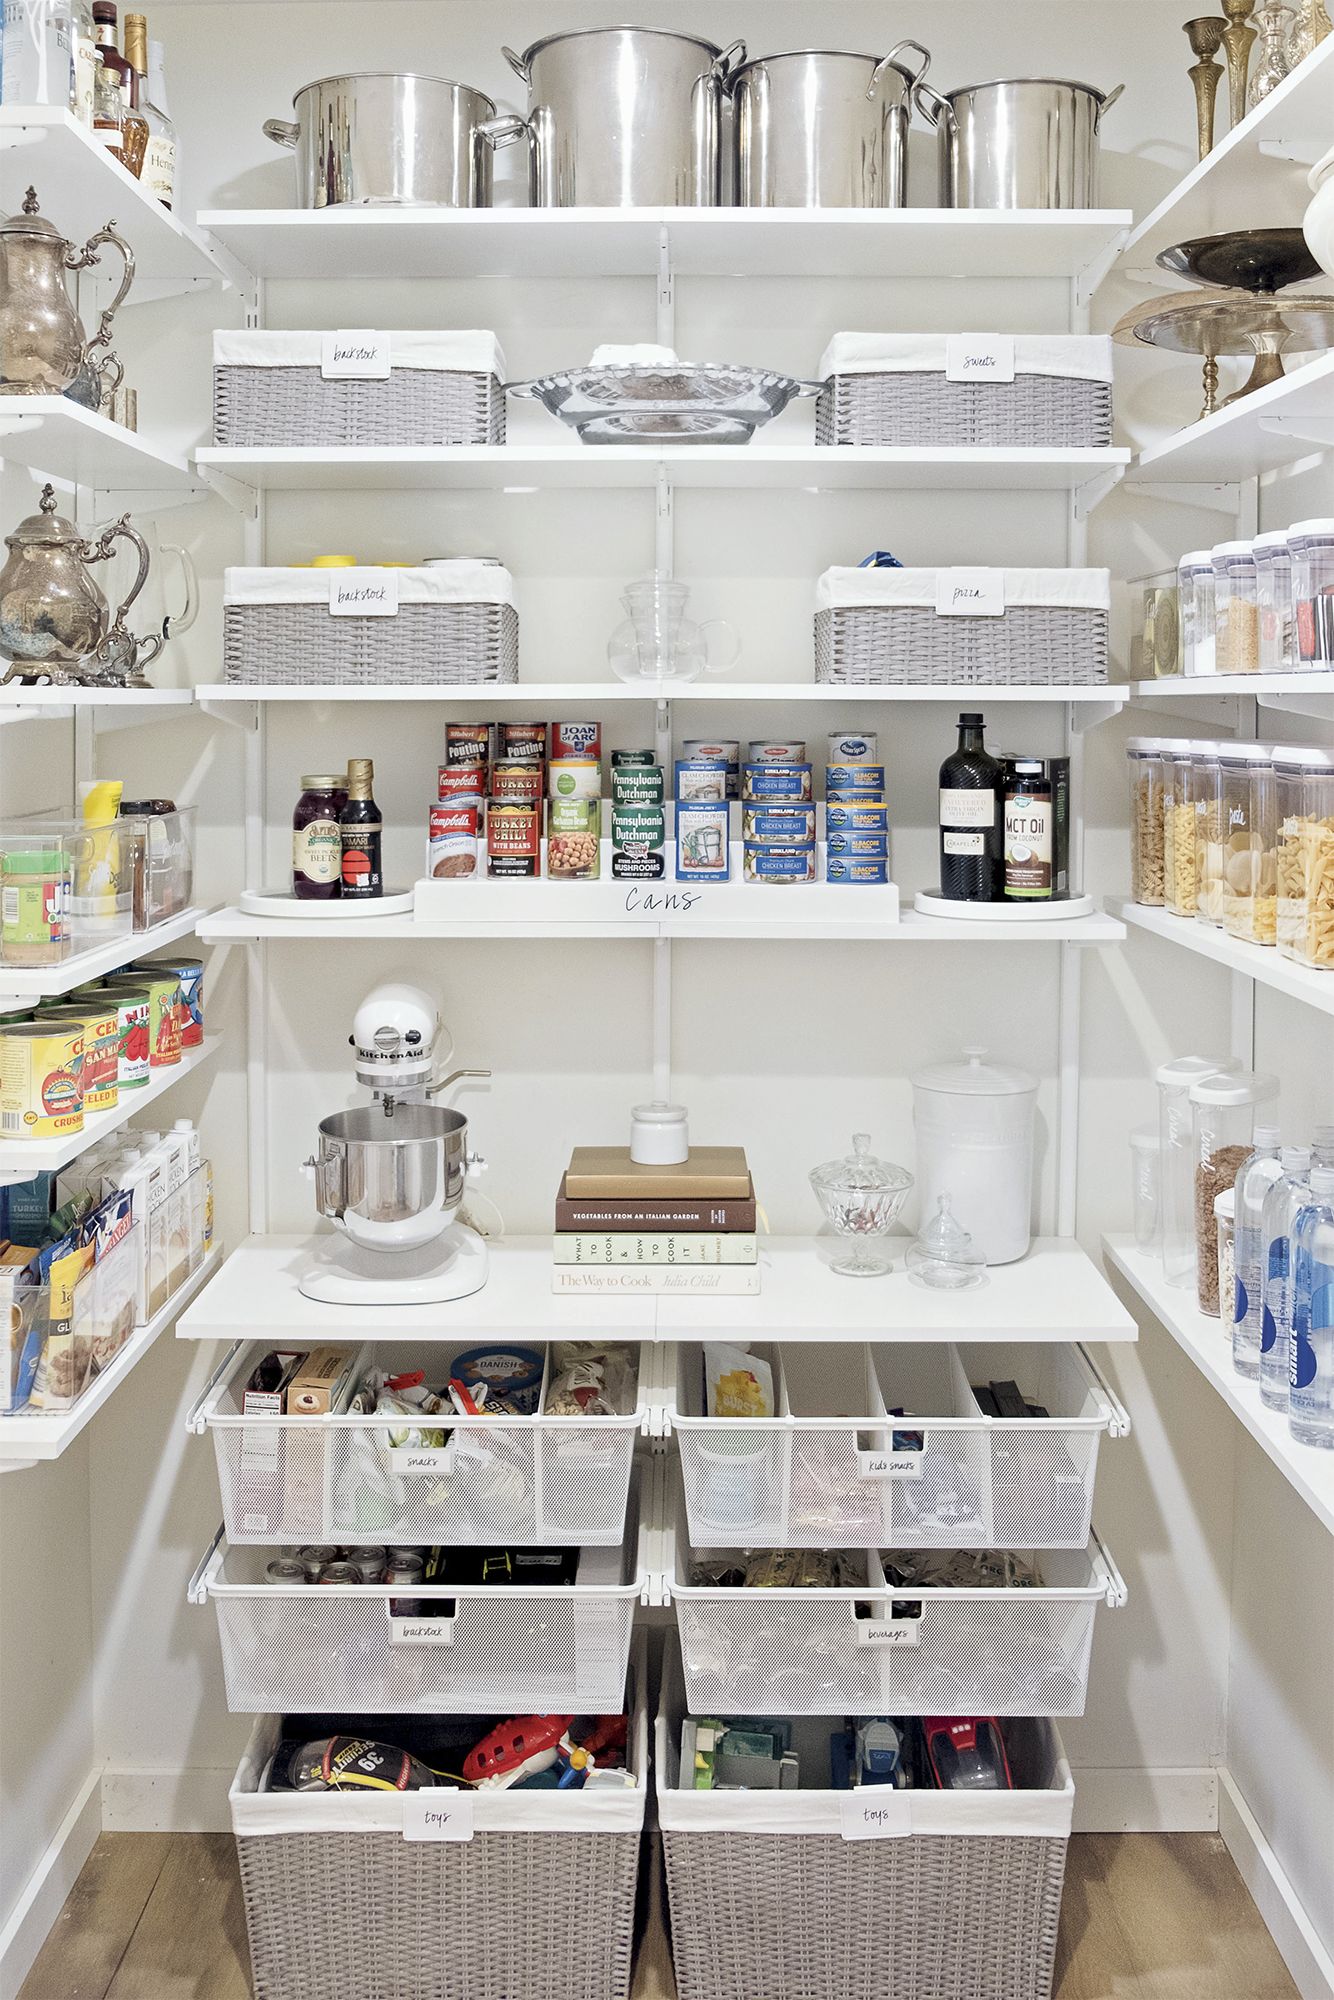 25 Pantry Organization Ideas and Tricks   How to Organize a Pantry